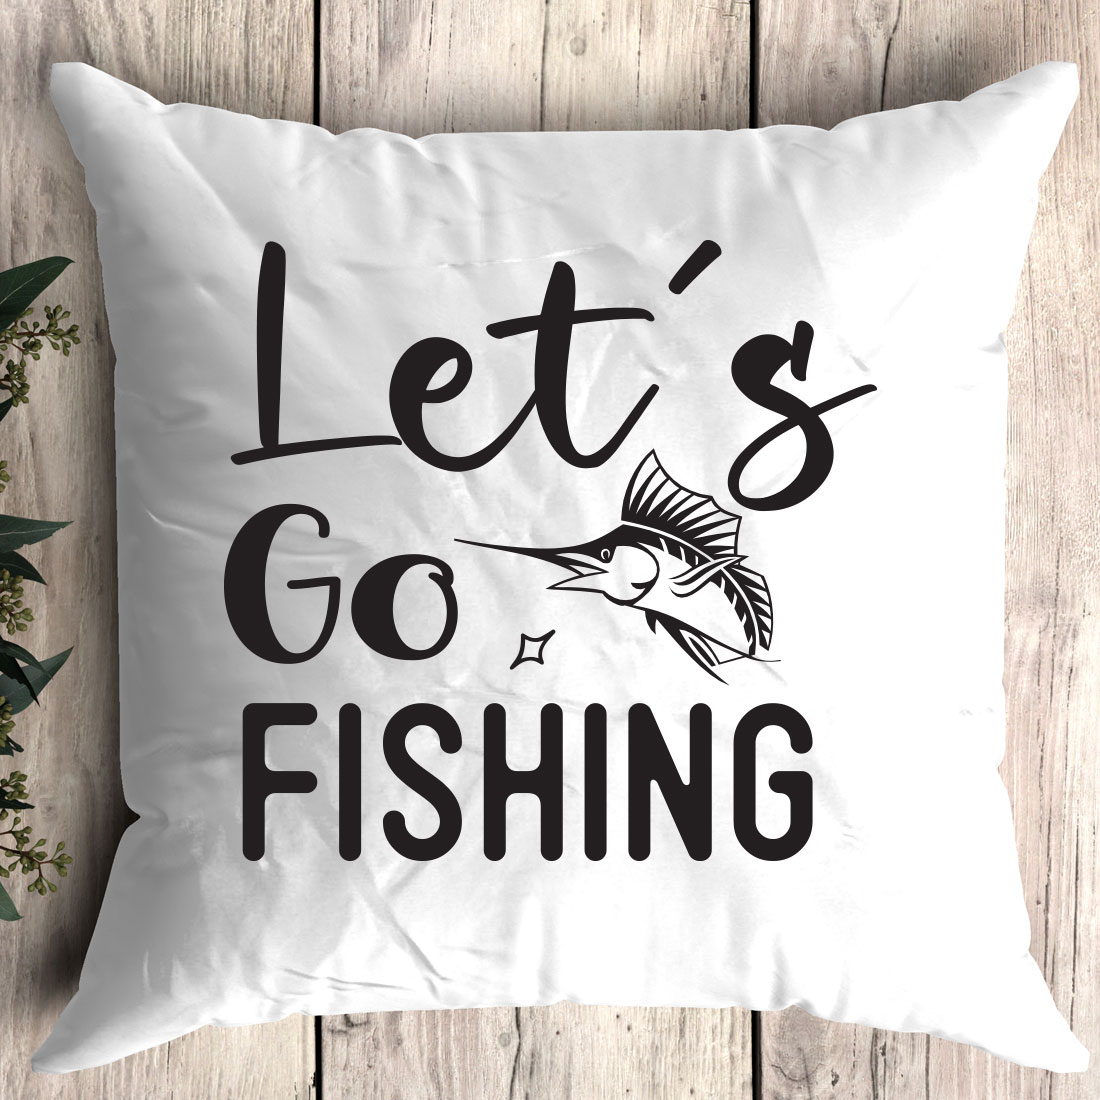 Pillow that says let's go fishing on it.